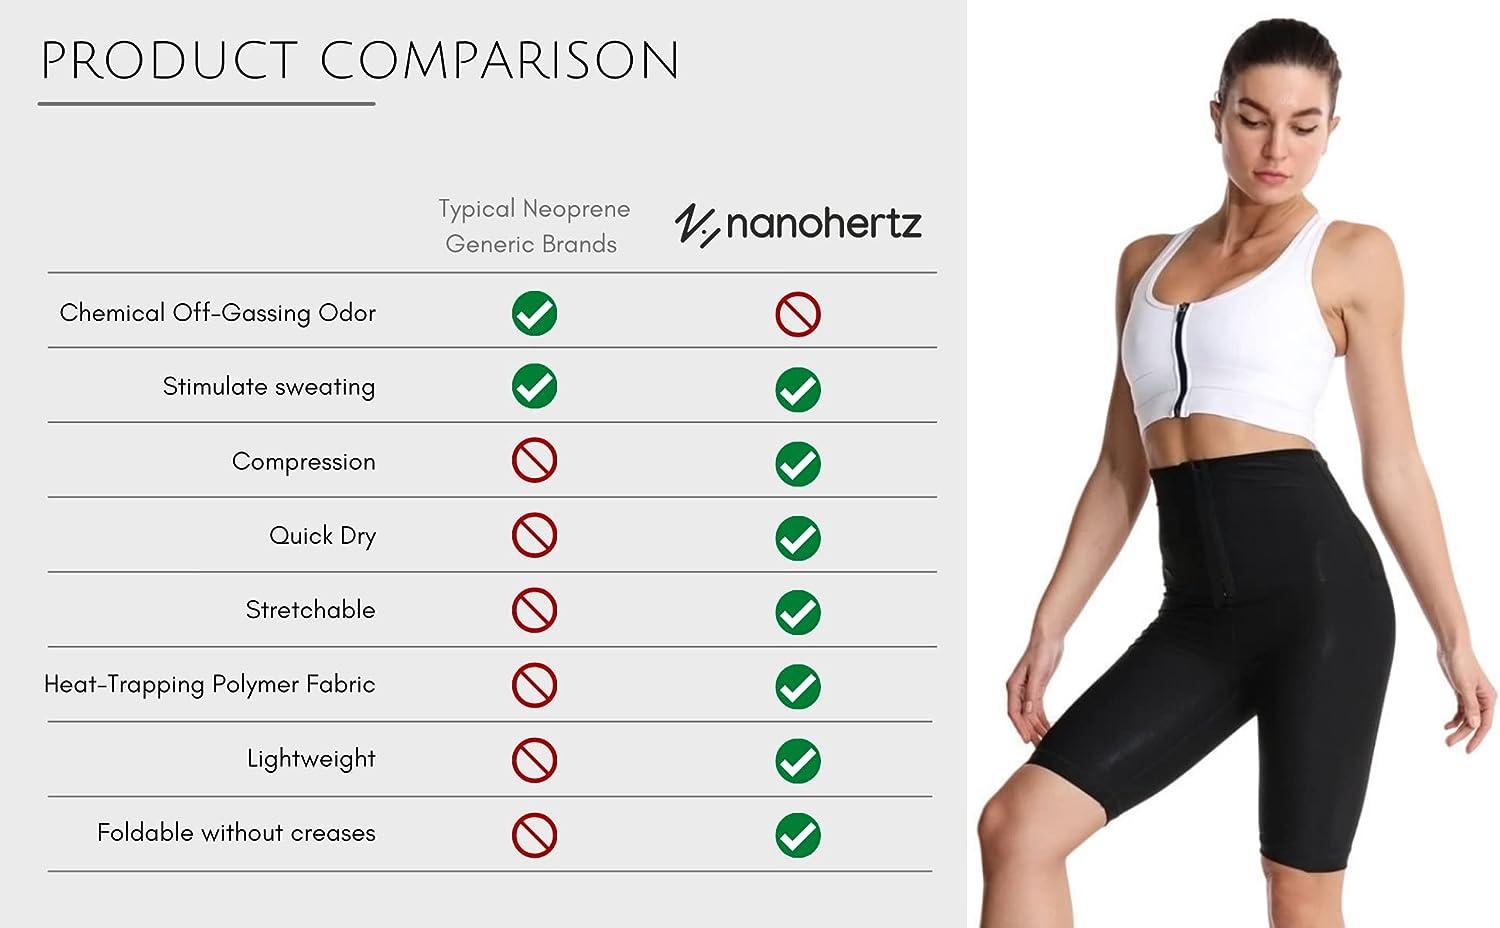 Supplyment For Body Building Shapewear - Buy Supplyment For Body